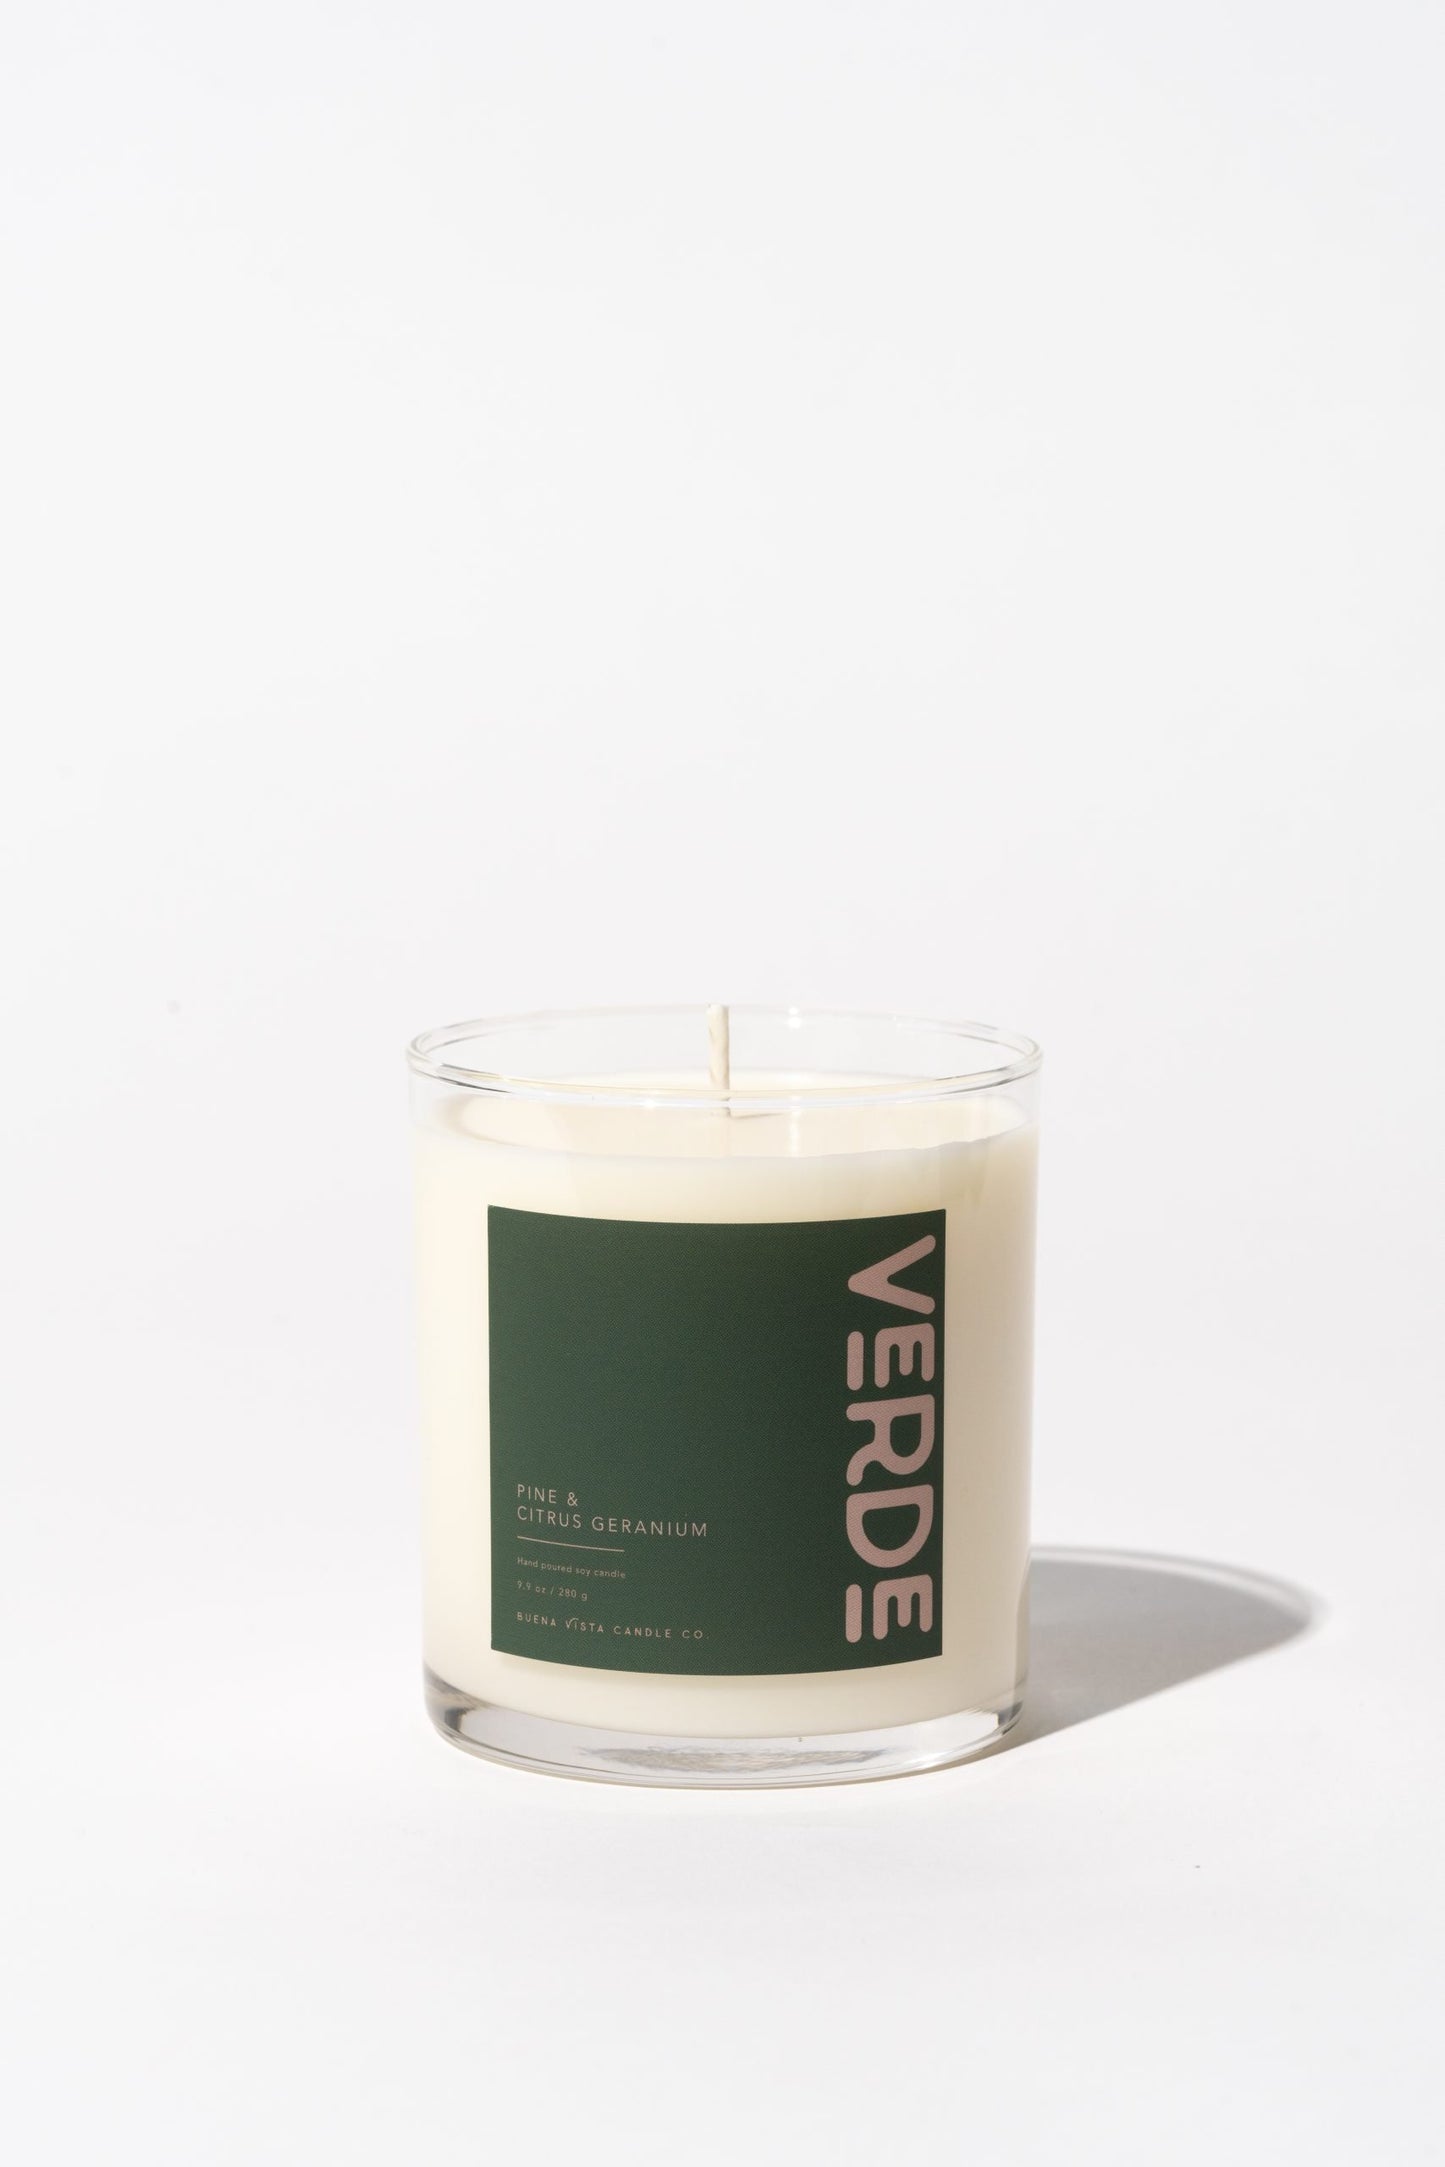 Verde Scent (All Sizes)